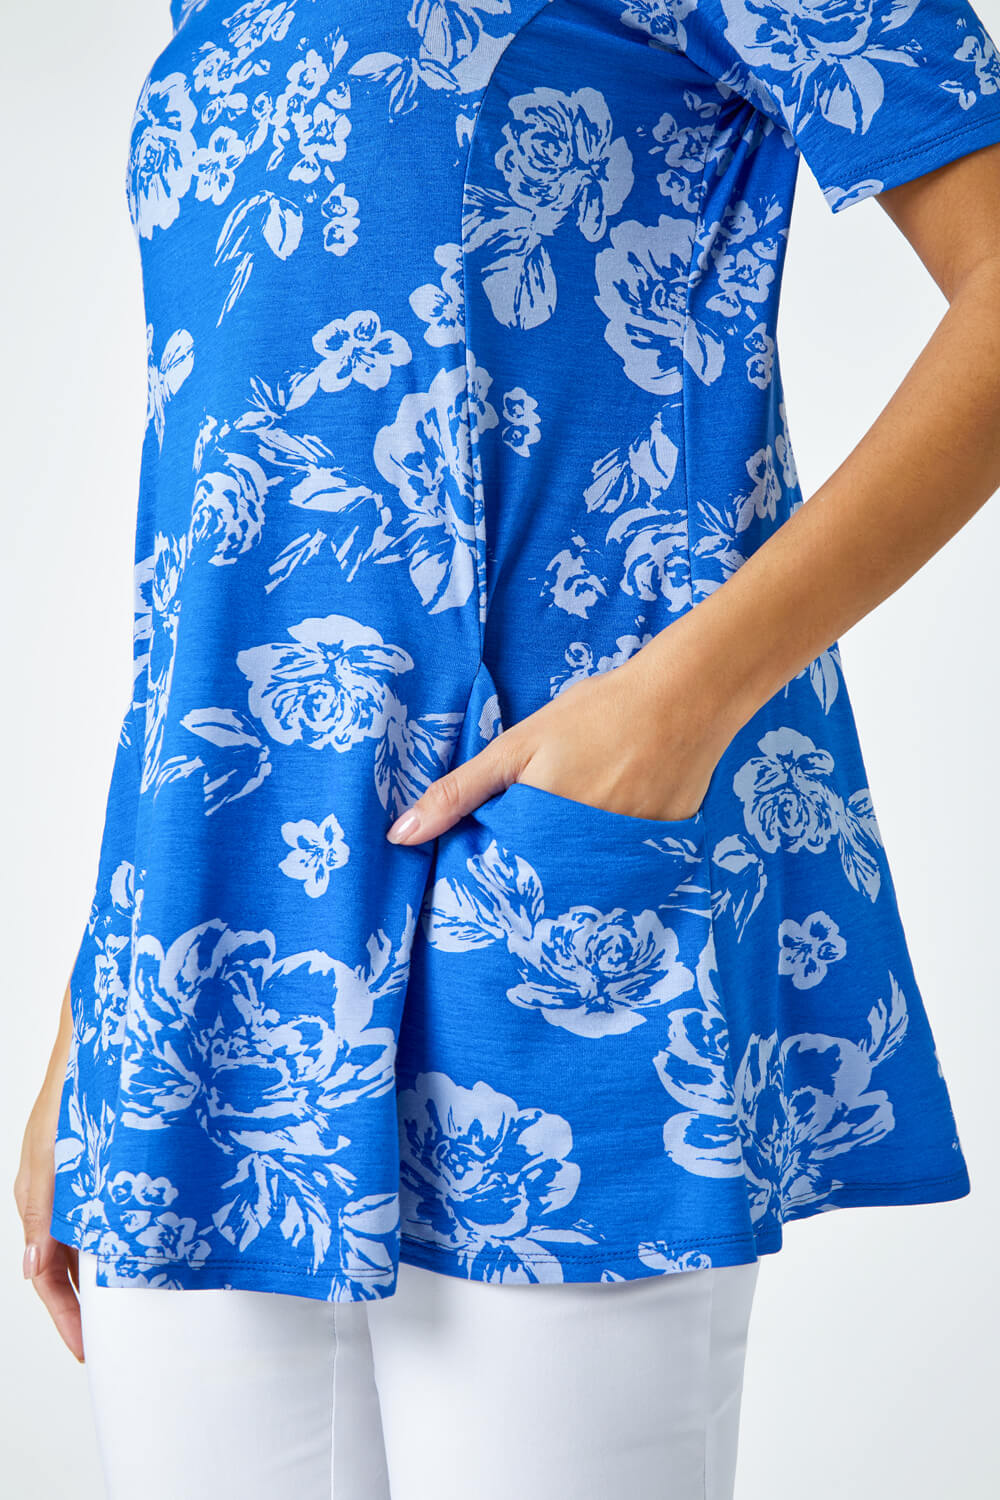 Blue Floral Print Stretch Tunic Pocket Top, Image 5 of 5